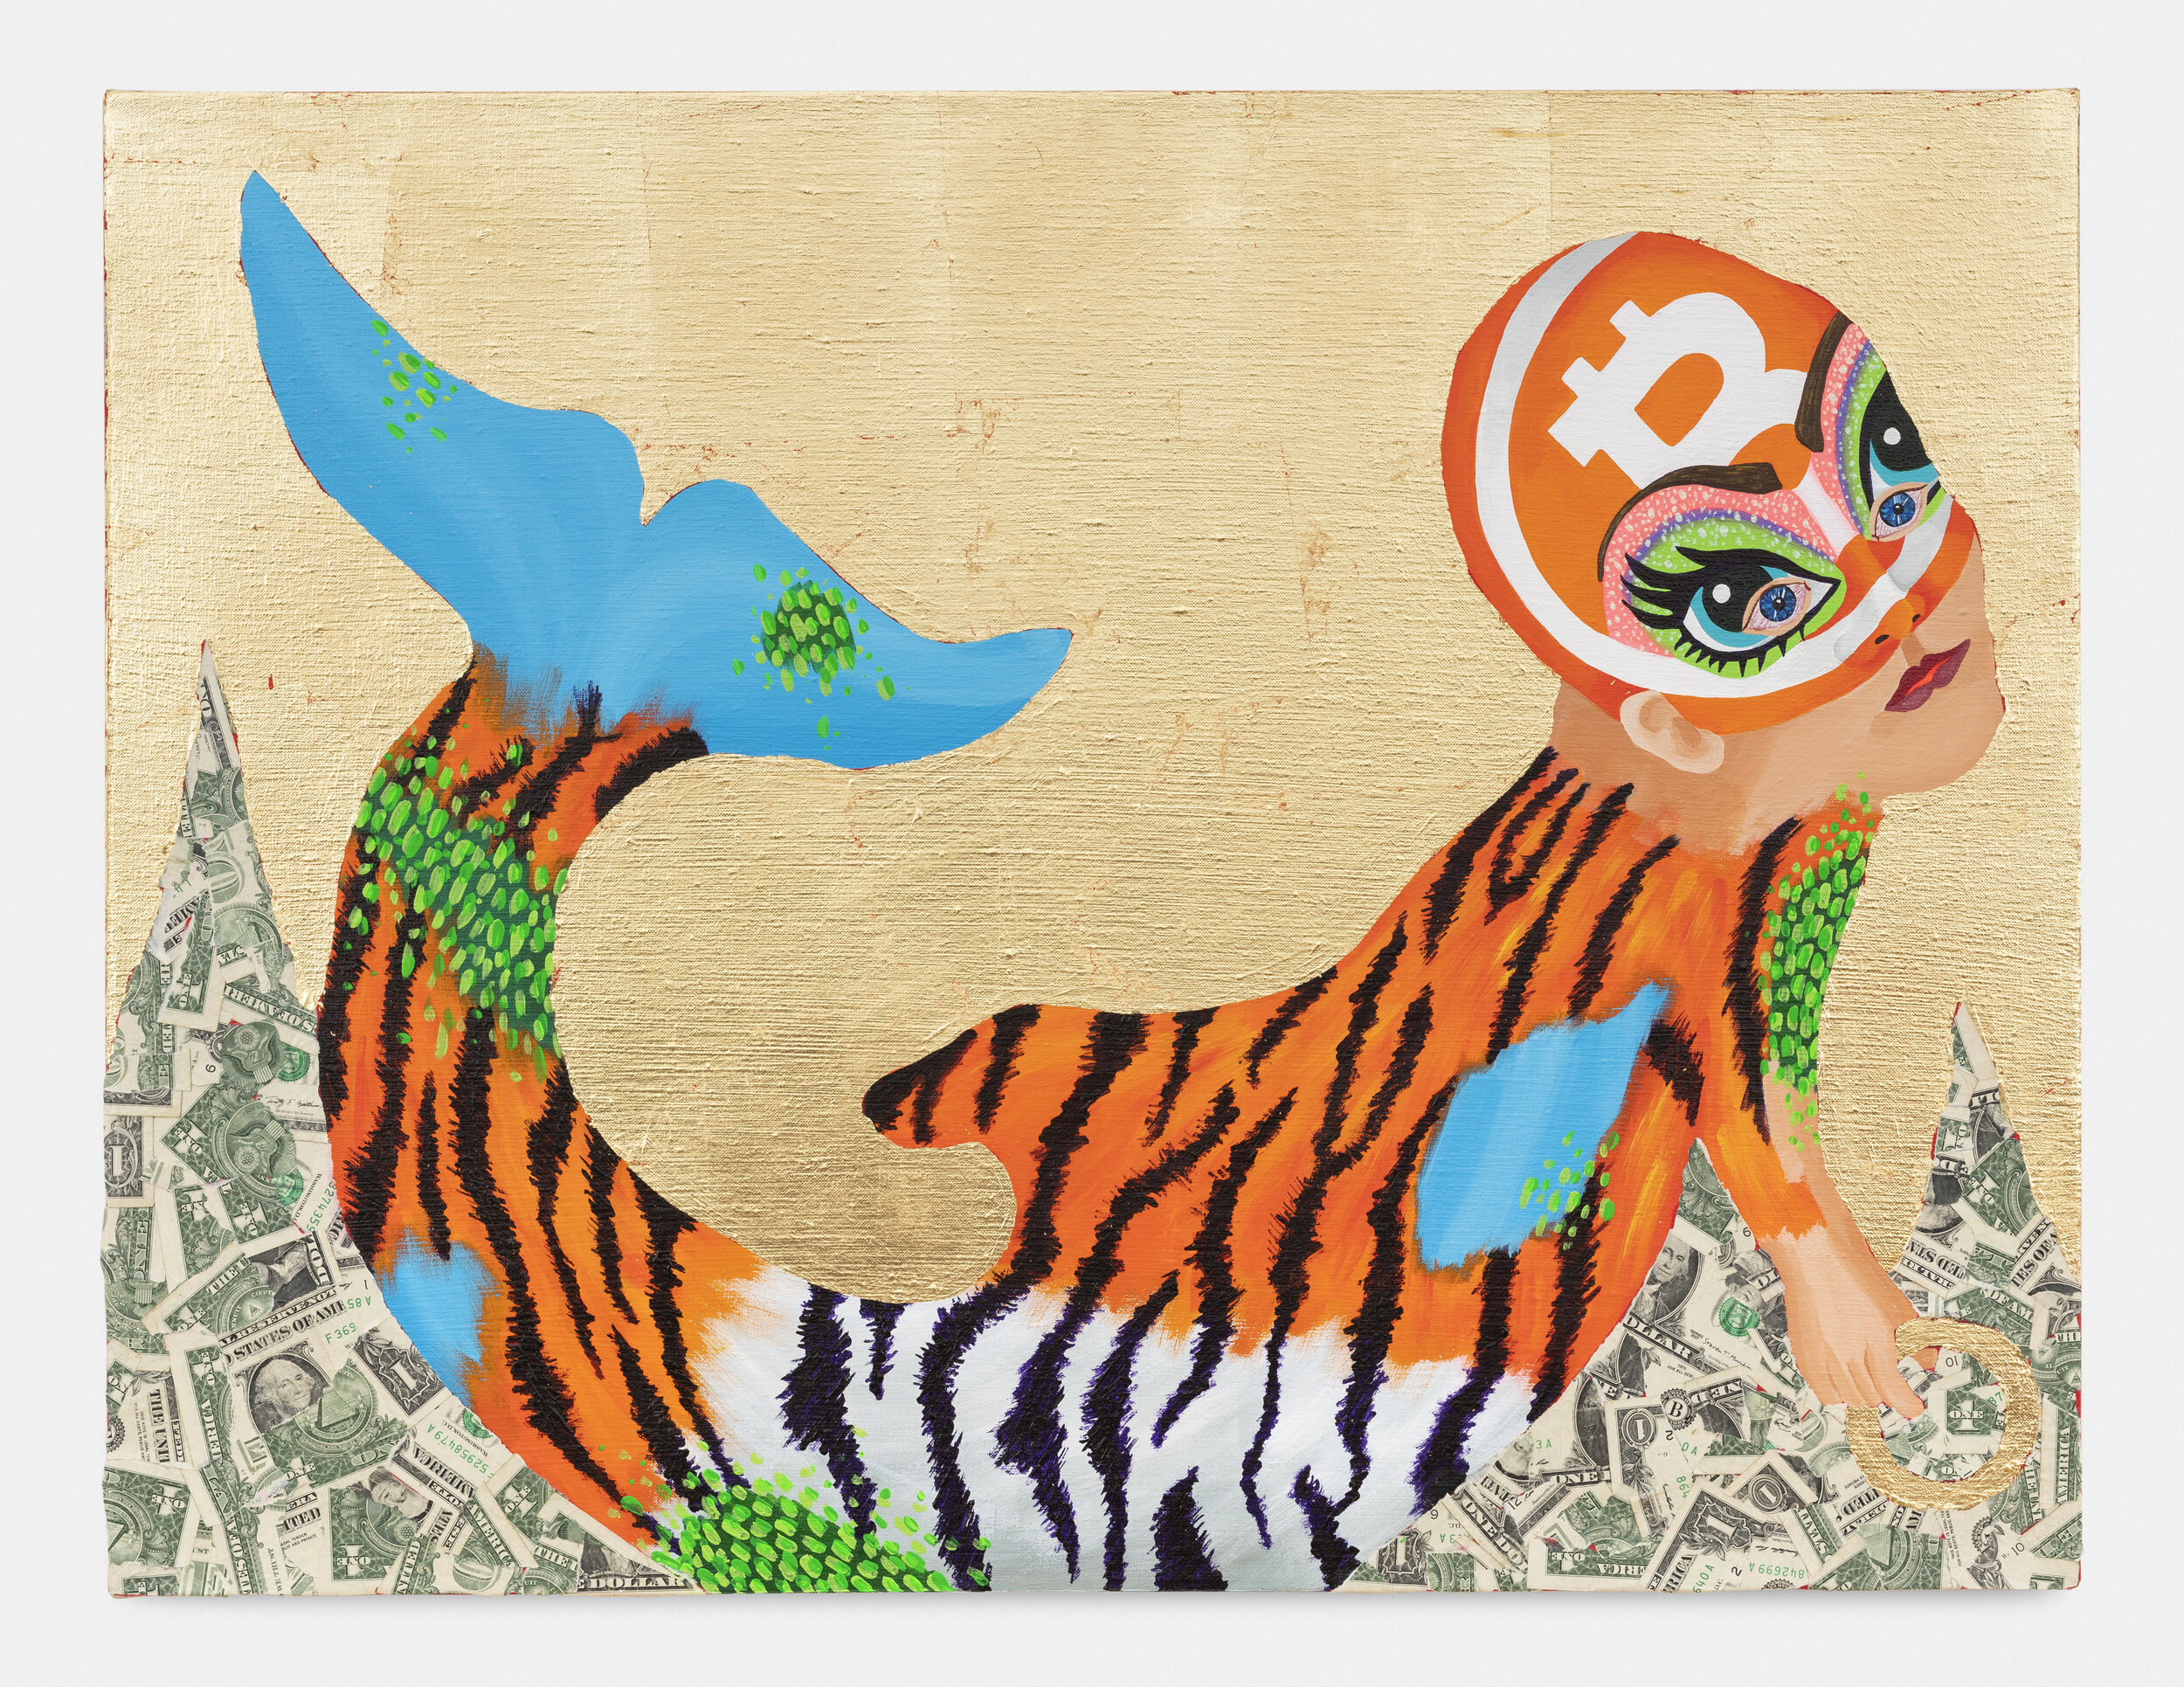   “Peaceable Kingdom #2 (Bitcoin Baby/Dolphin/Tiger)” , 2020  29 x 22 x 1.5 inches (73.66 x 55.88 x 3.81 cm.)  Acrylic, gold leaf, and dollar bills on linen 